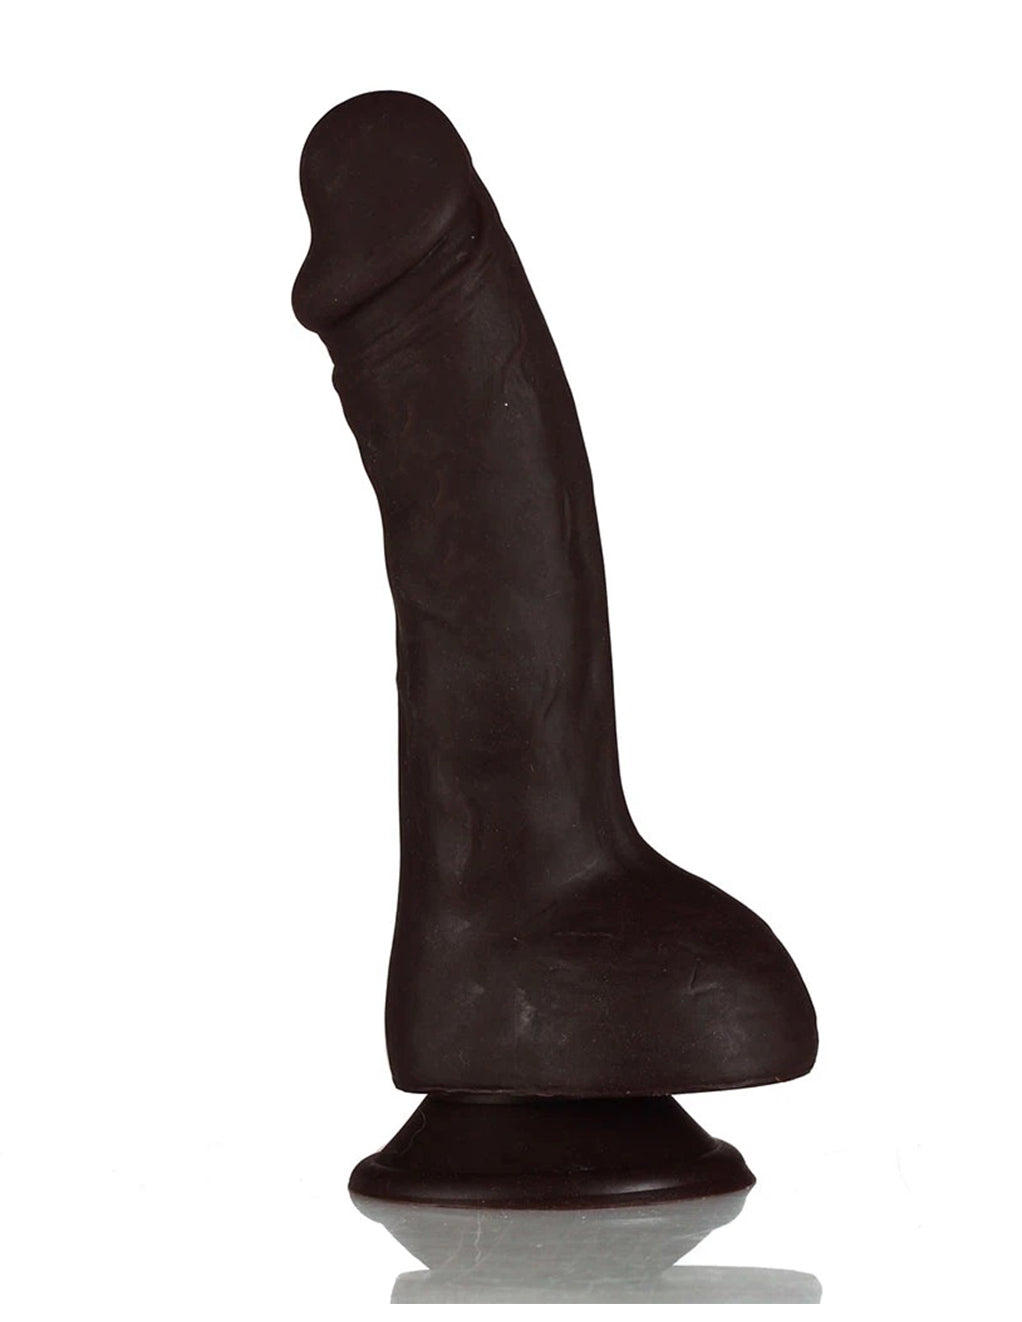 Maia Phoenix 8 inch Silicone Realistic Veined Suction Cup Dildo- Brown- Side